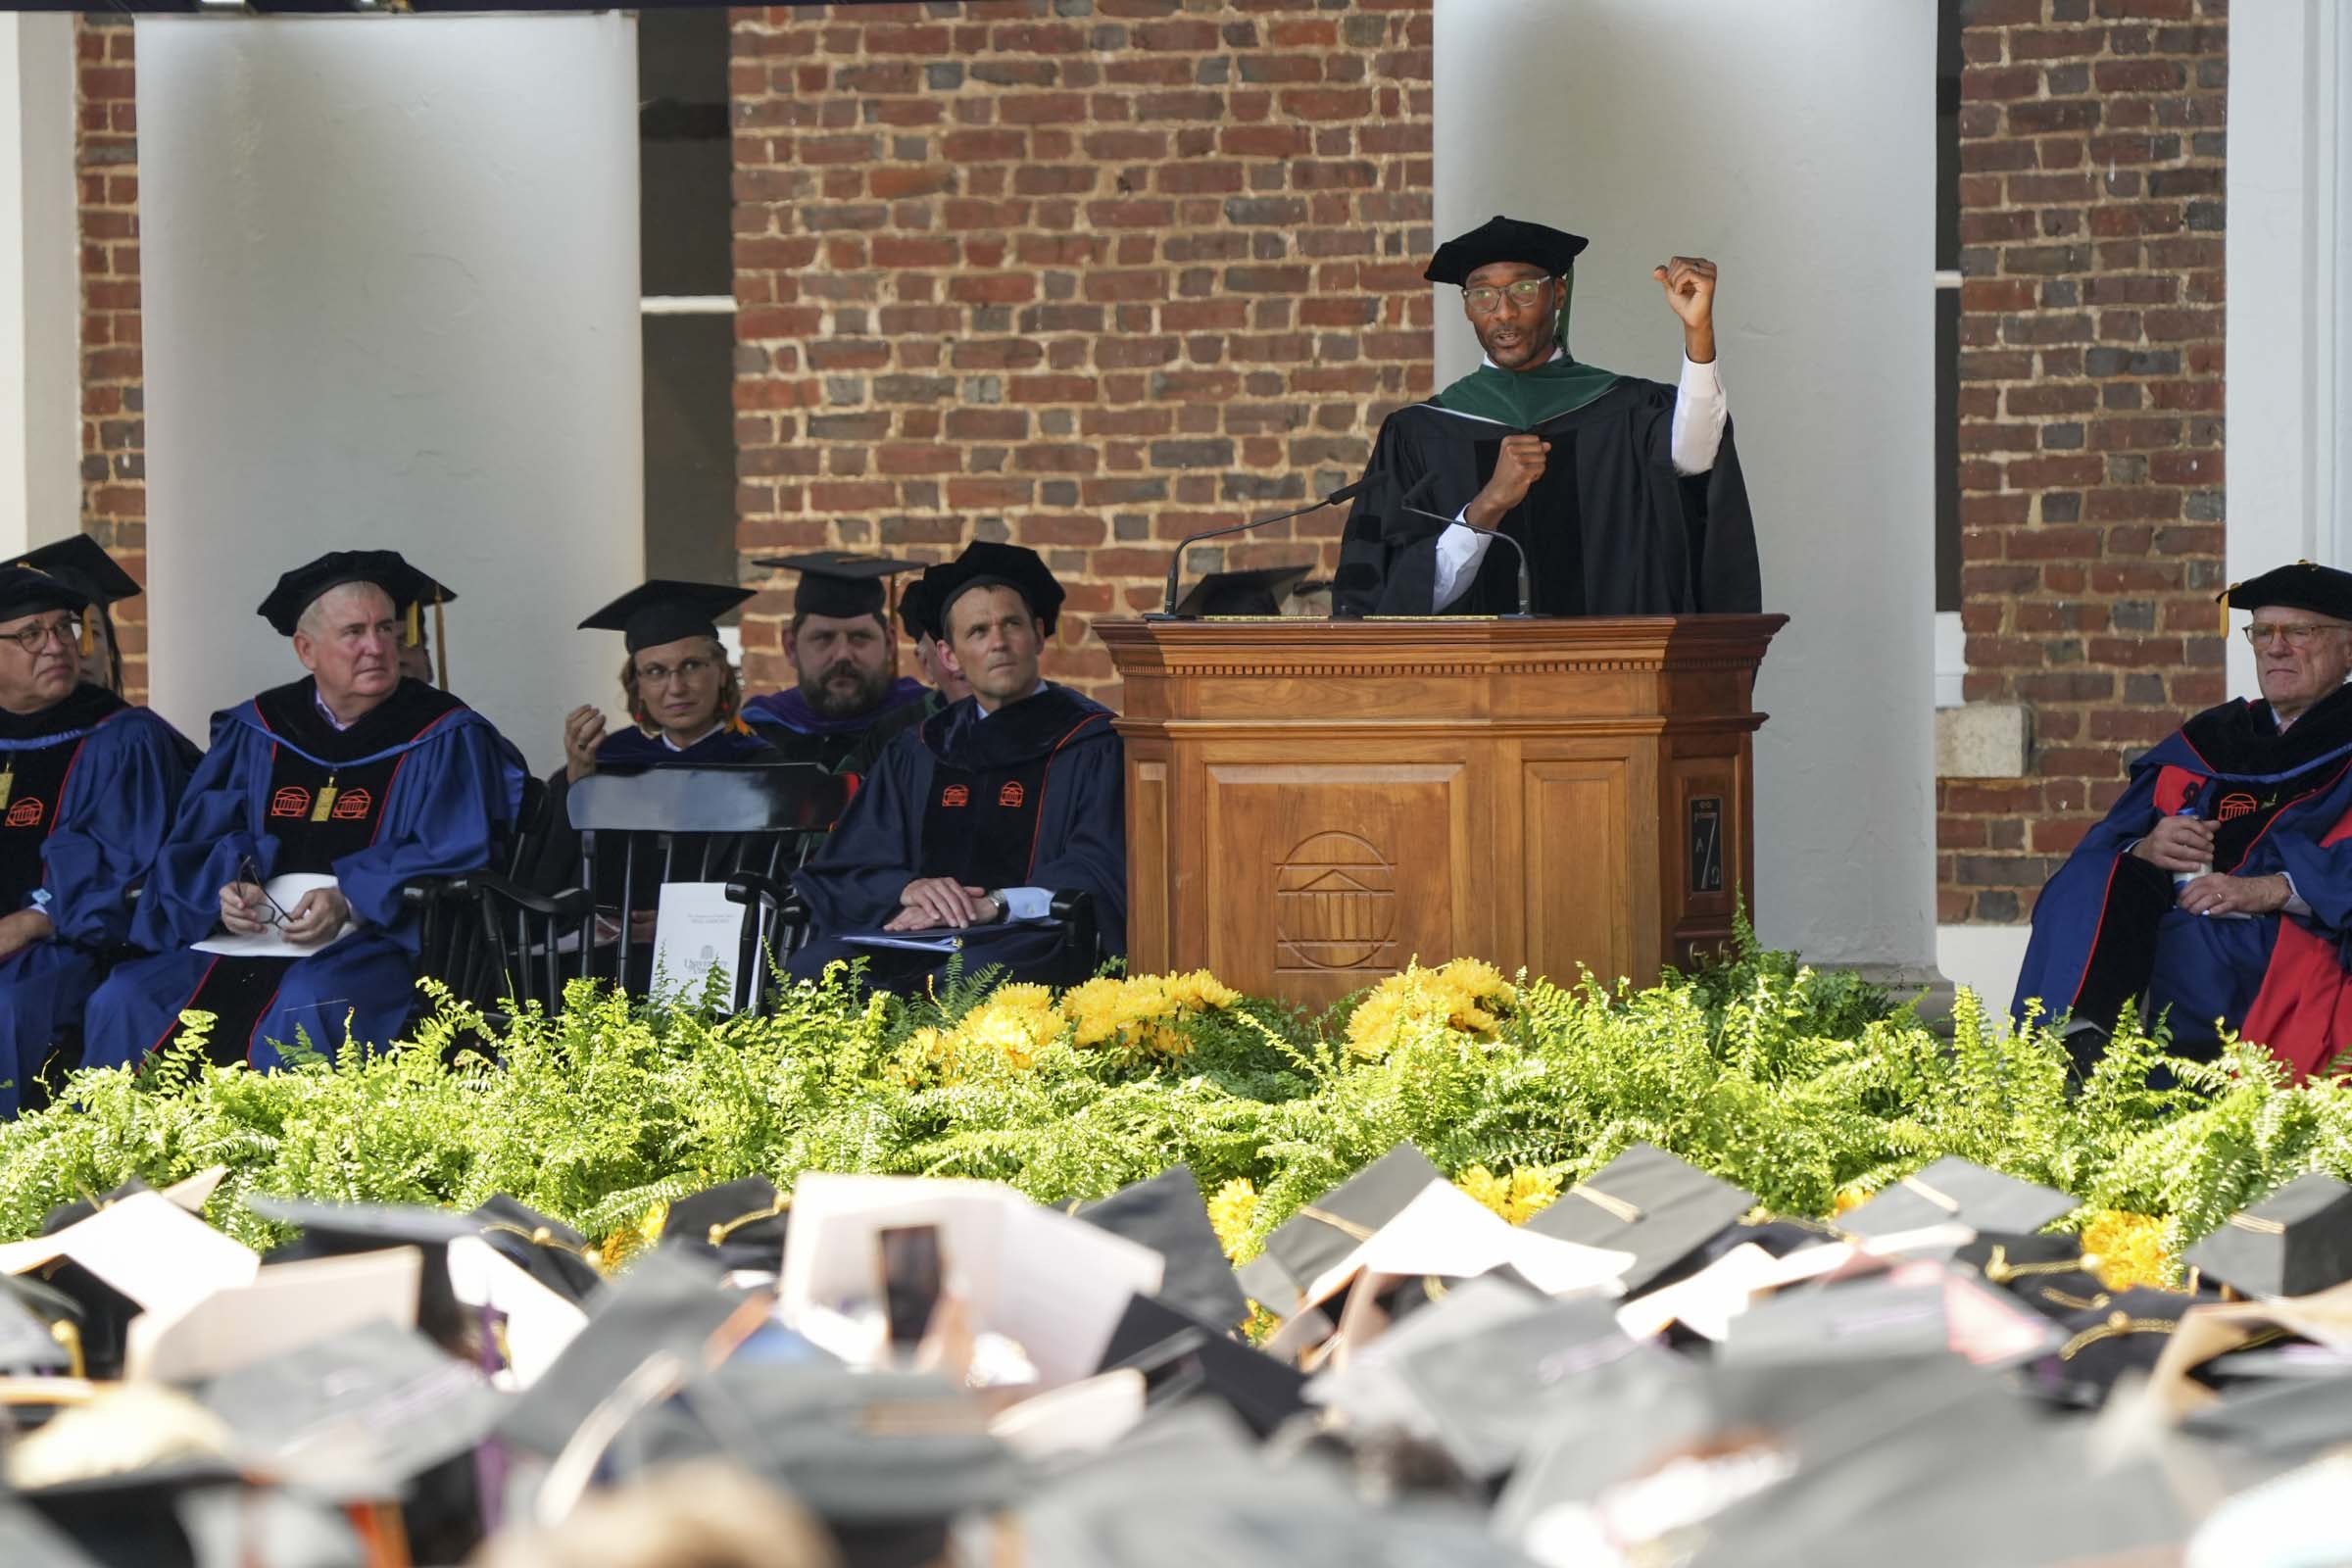 Taison Bell, speaking from a podium to a crowd of seated graduates in caps, gestures with closed fists